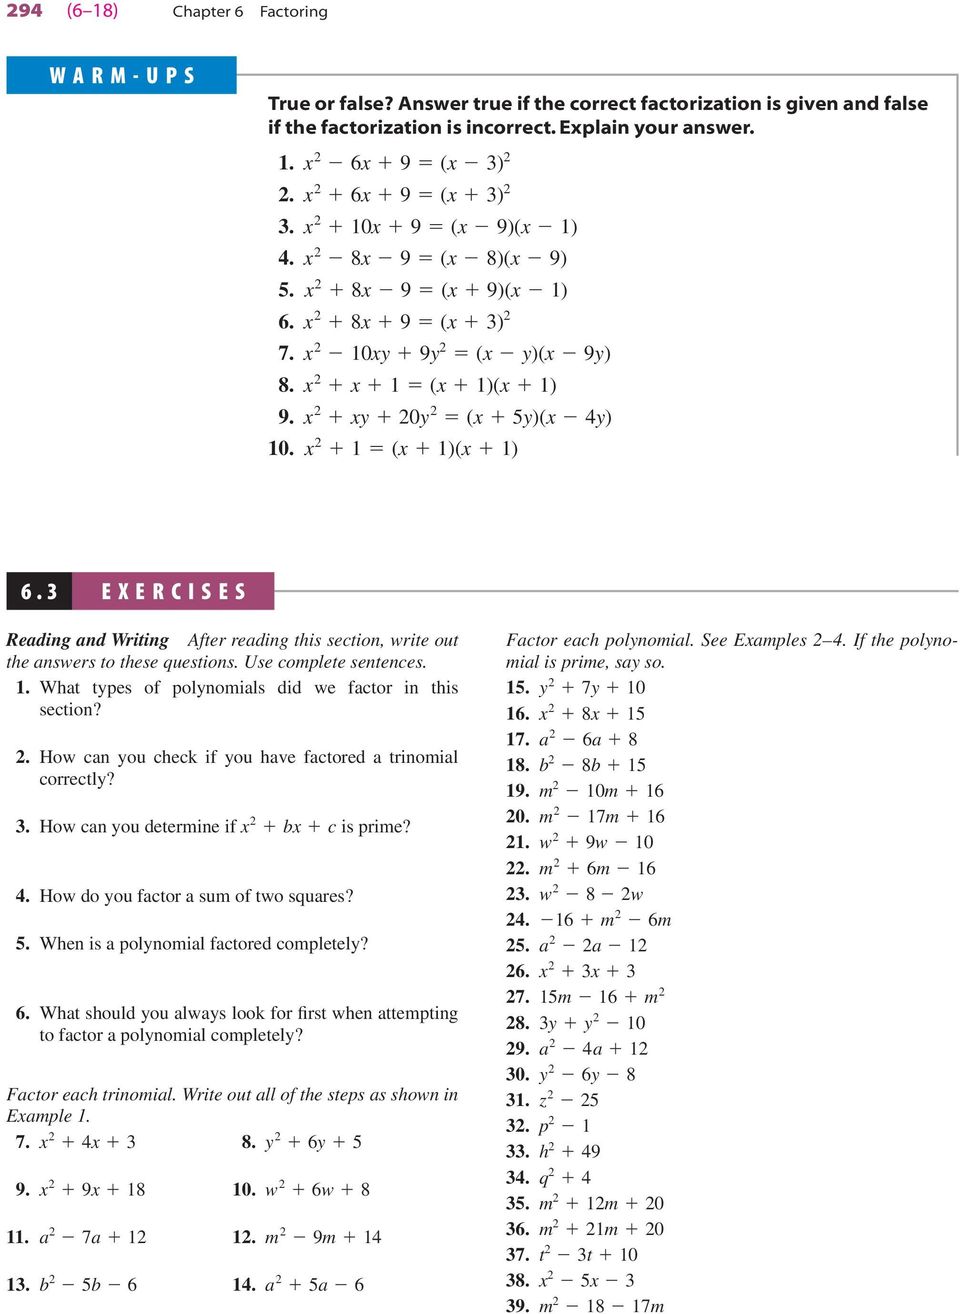 x 2 1 (x 1)(x 1) 6.3 EXERCISES Reading and Writing After reading this section, write out the answers to these questions. Use complete sentences. 1. What types of polynomials did we factor in this section?